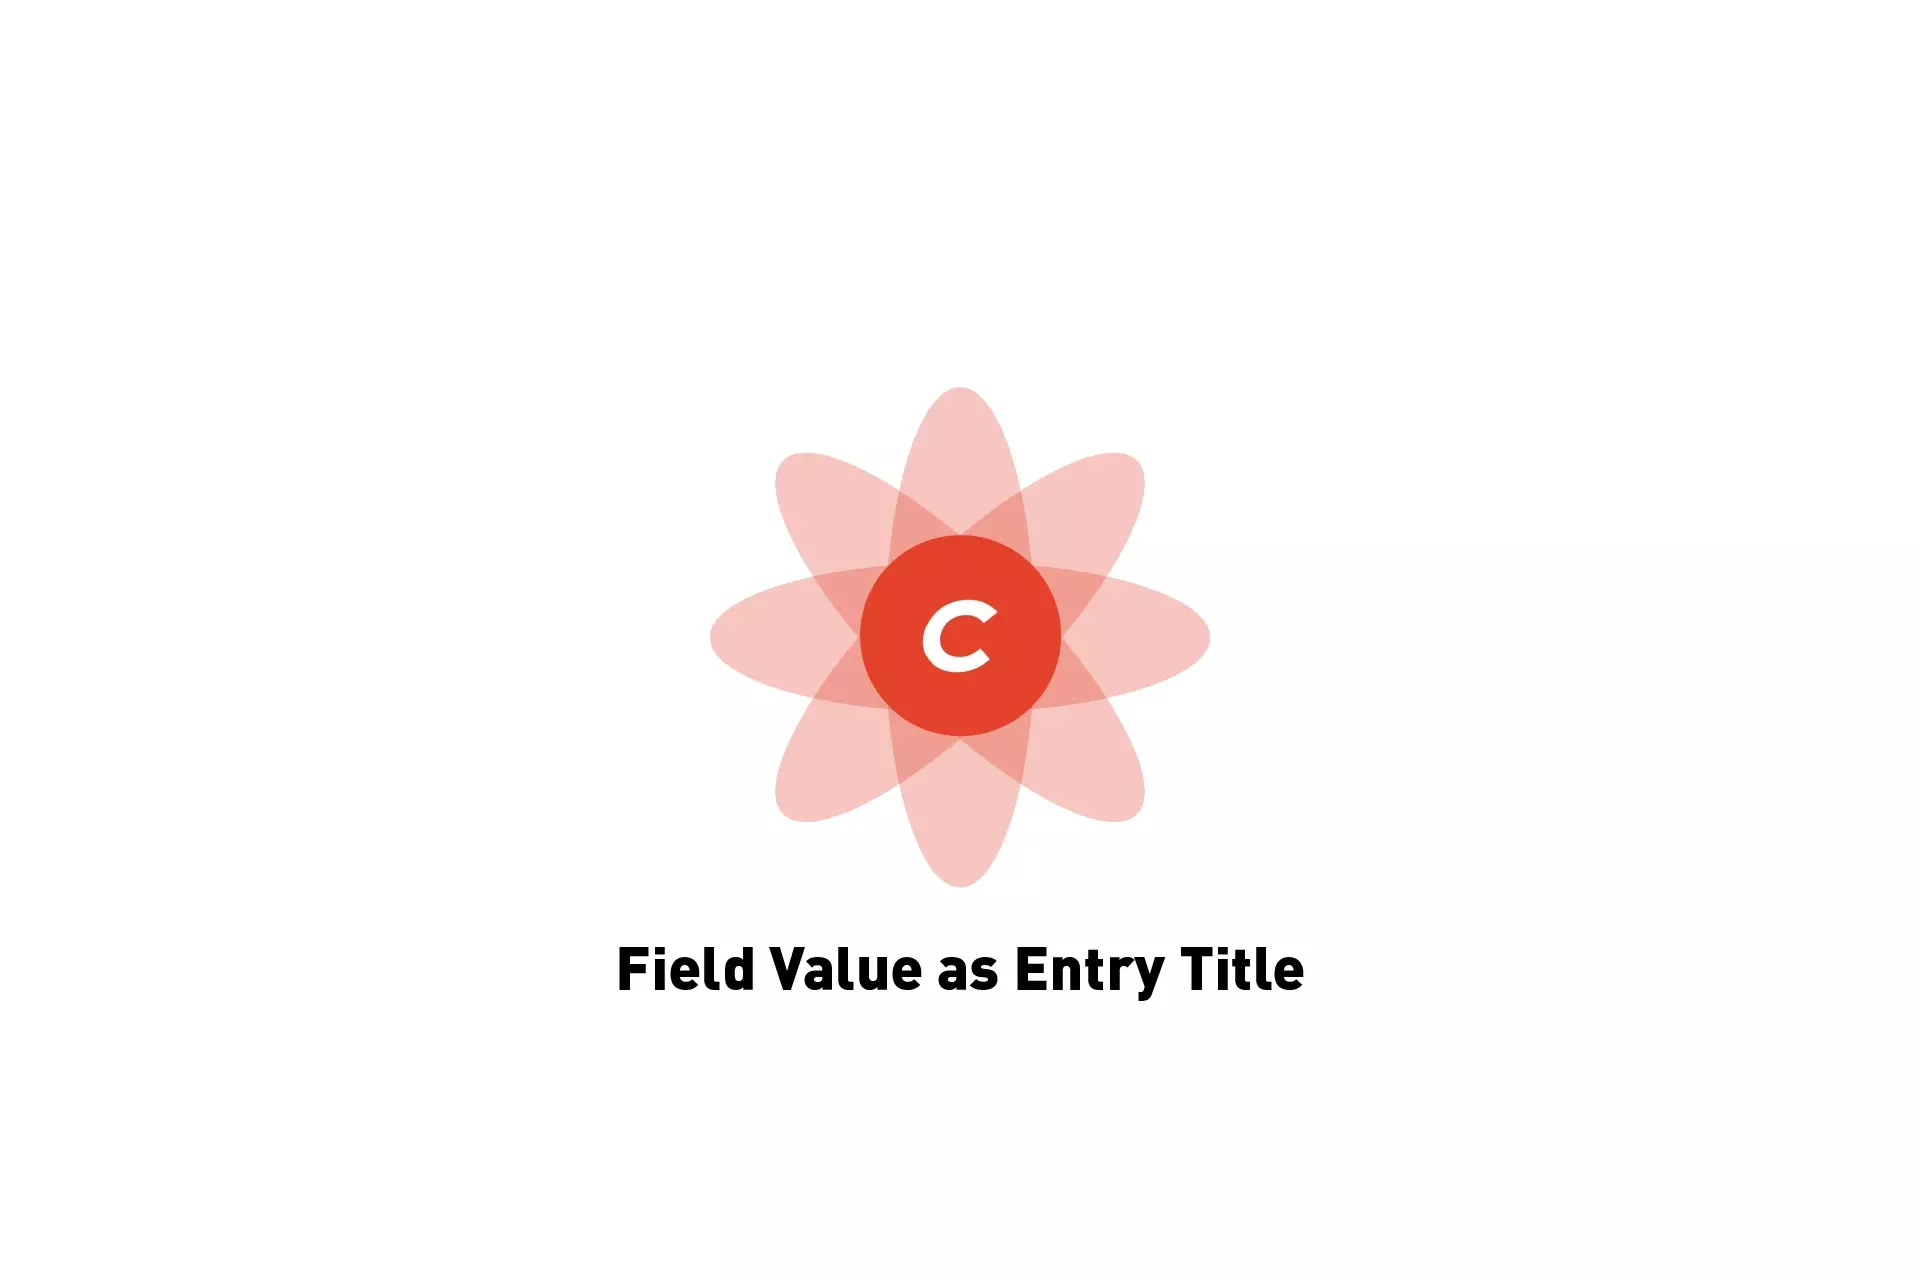 A flower that represents Craft CMS with the text "Field Value as Entry Title" beneath it.